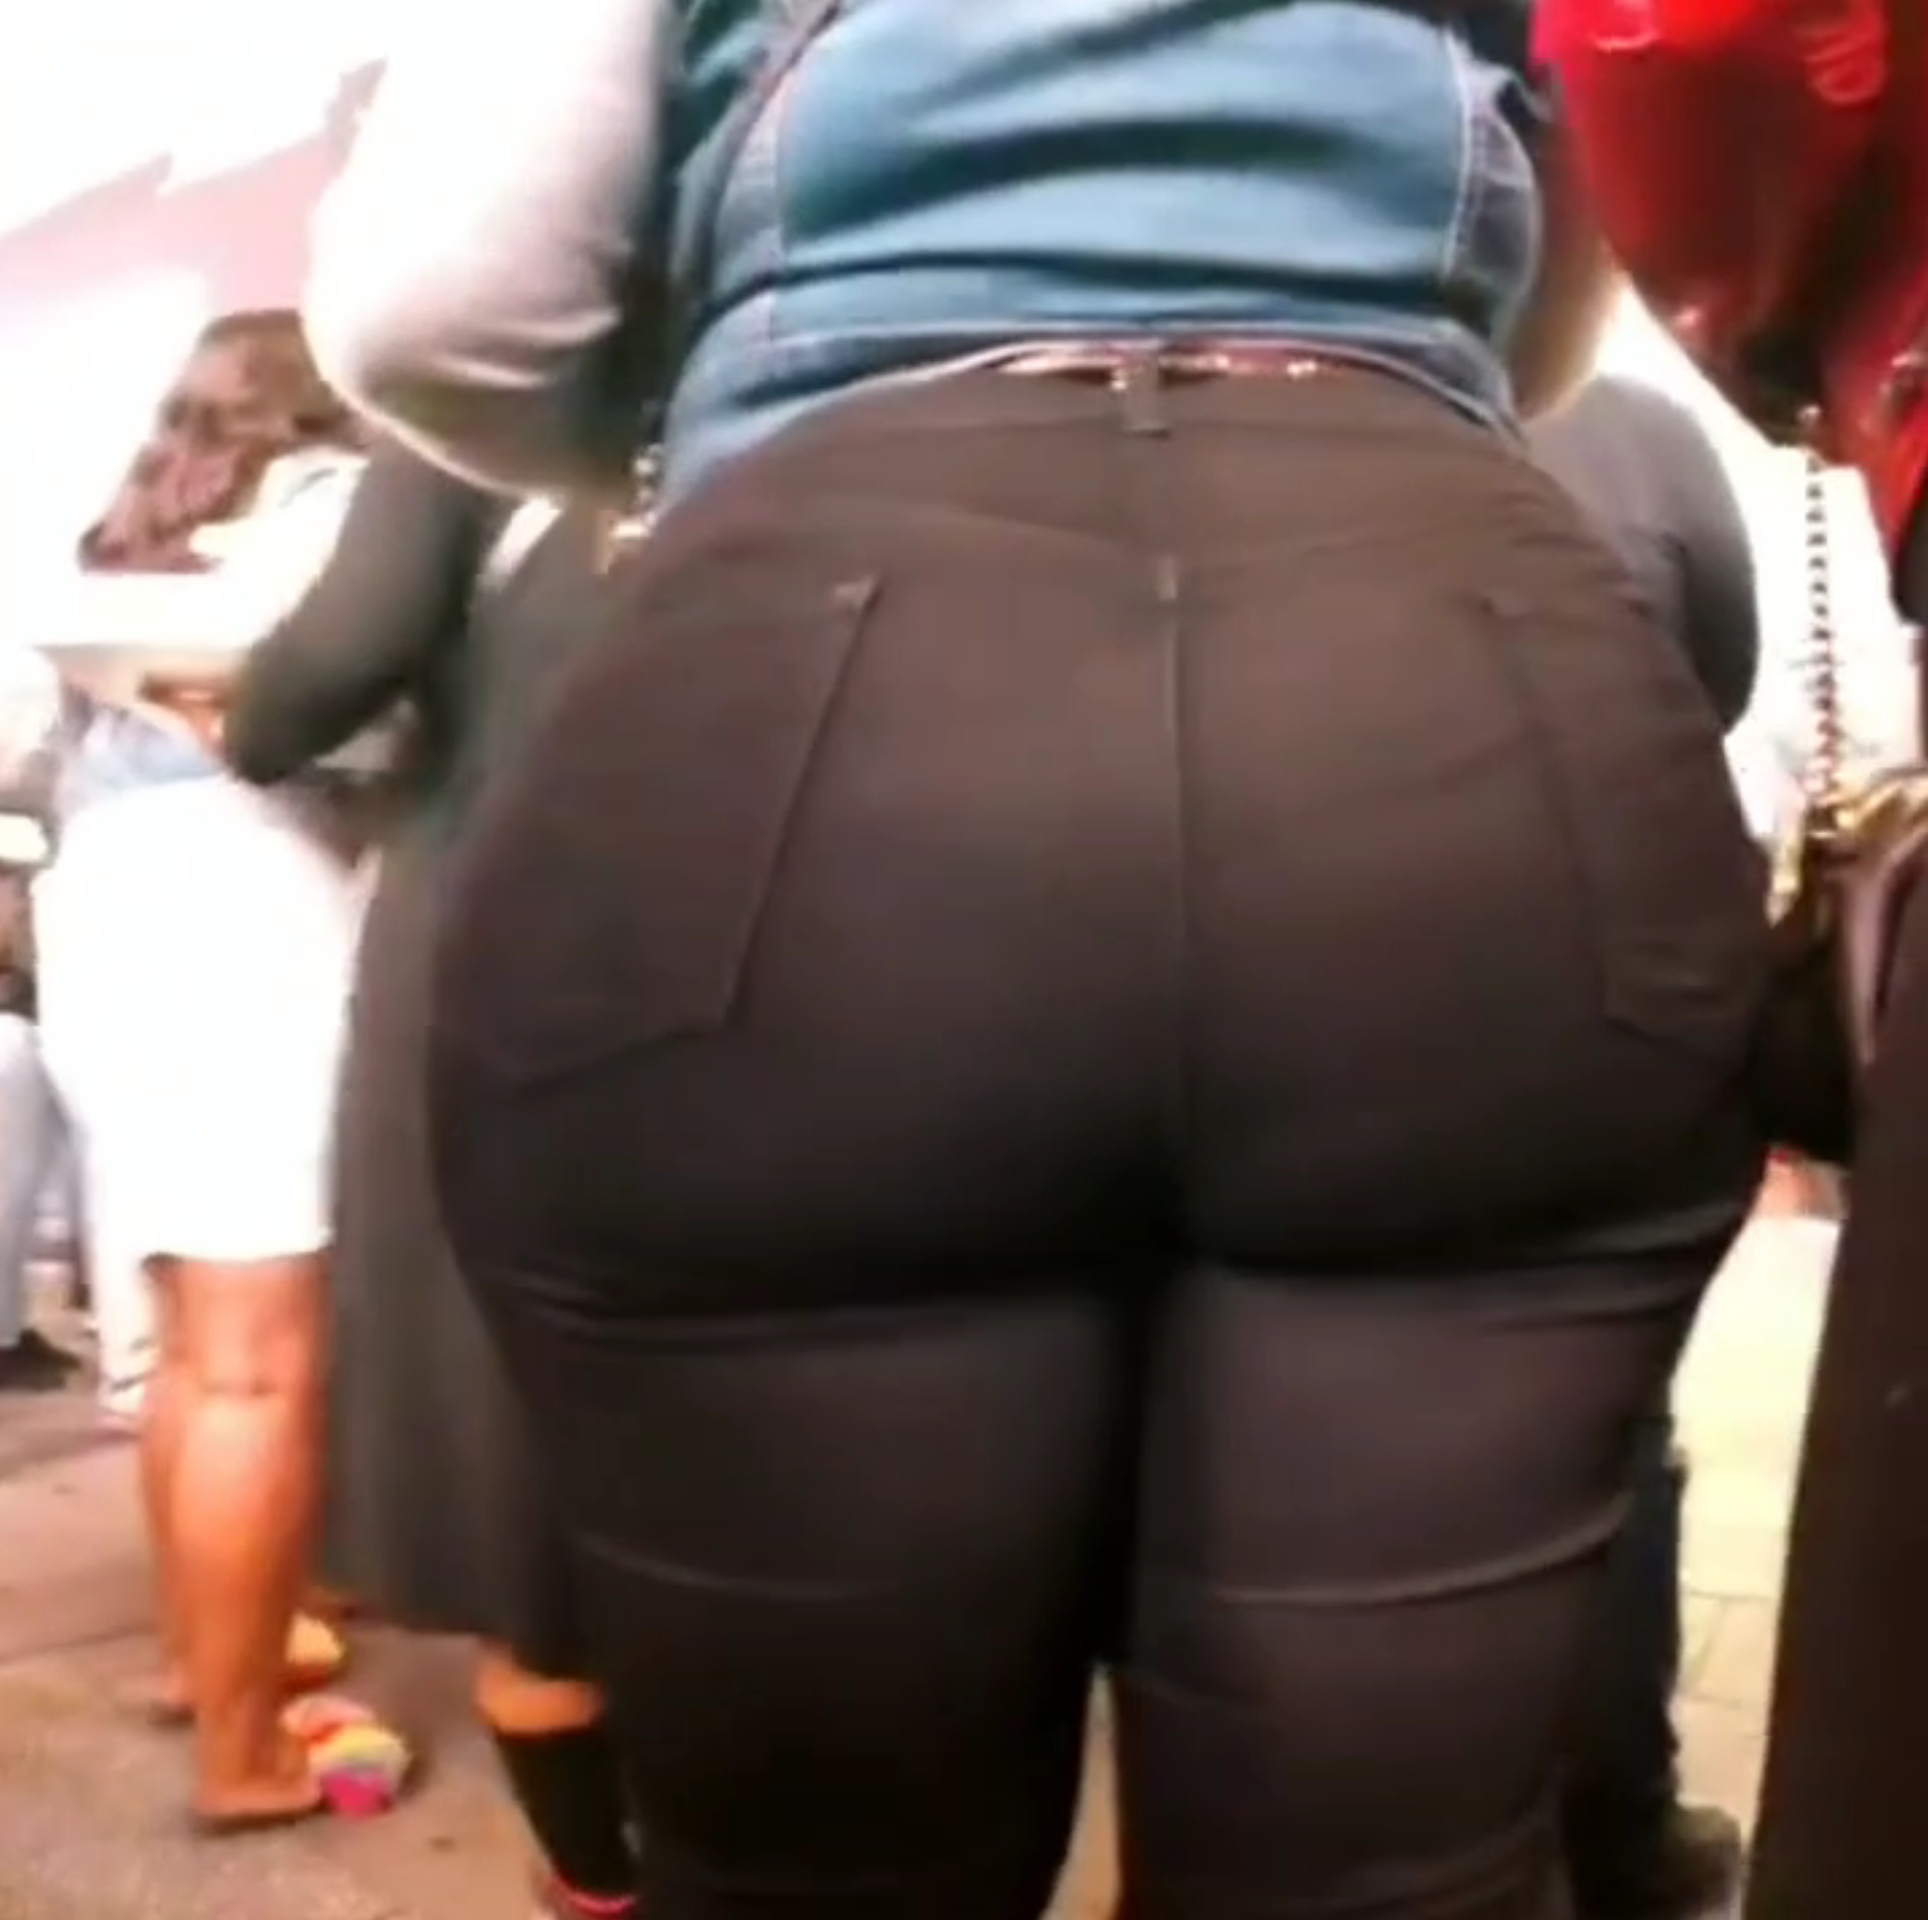 OMEGA PERFECT PHAT BOOTY BBW CANDID